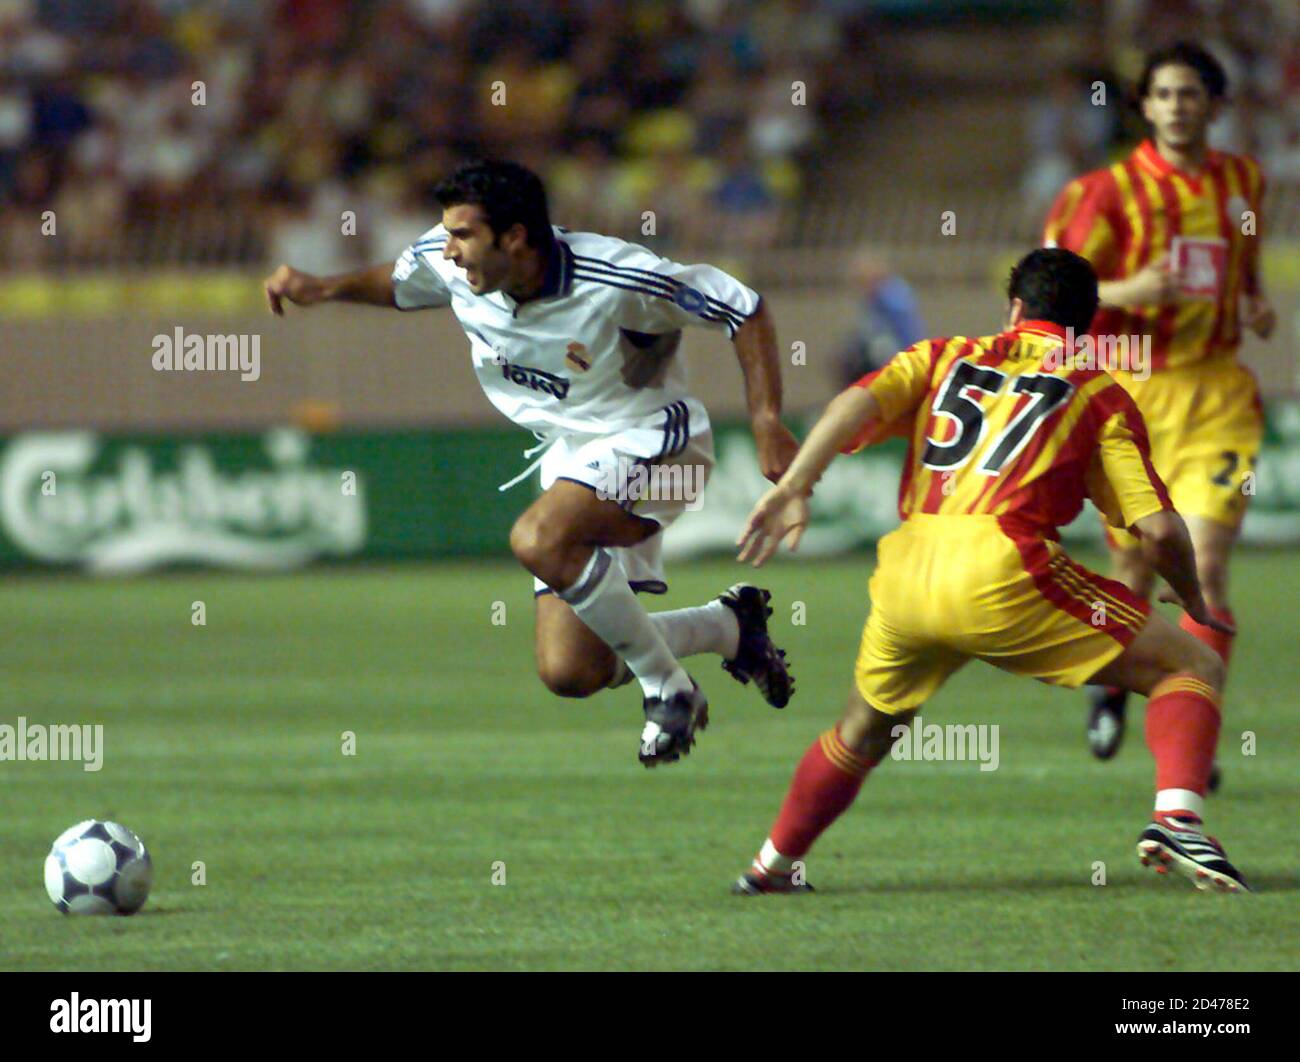 Real Madrid's Portuguese midfielder Luis Figo (L) escapes a tackle by  Galatasaray defender Hakan Unsal (57) in the Louis II stadium in Monaco  August 25, 2000. UEFA Cup winners Galatasaray and Champions'